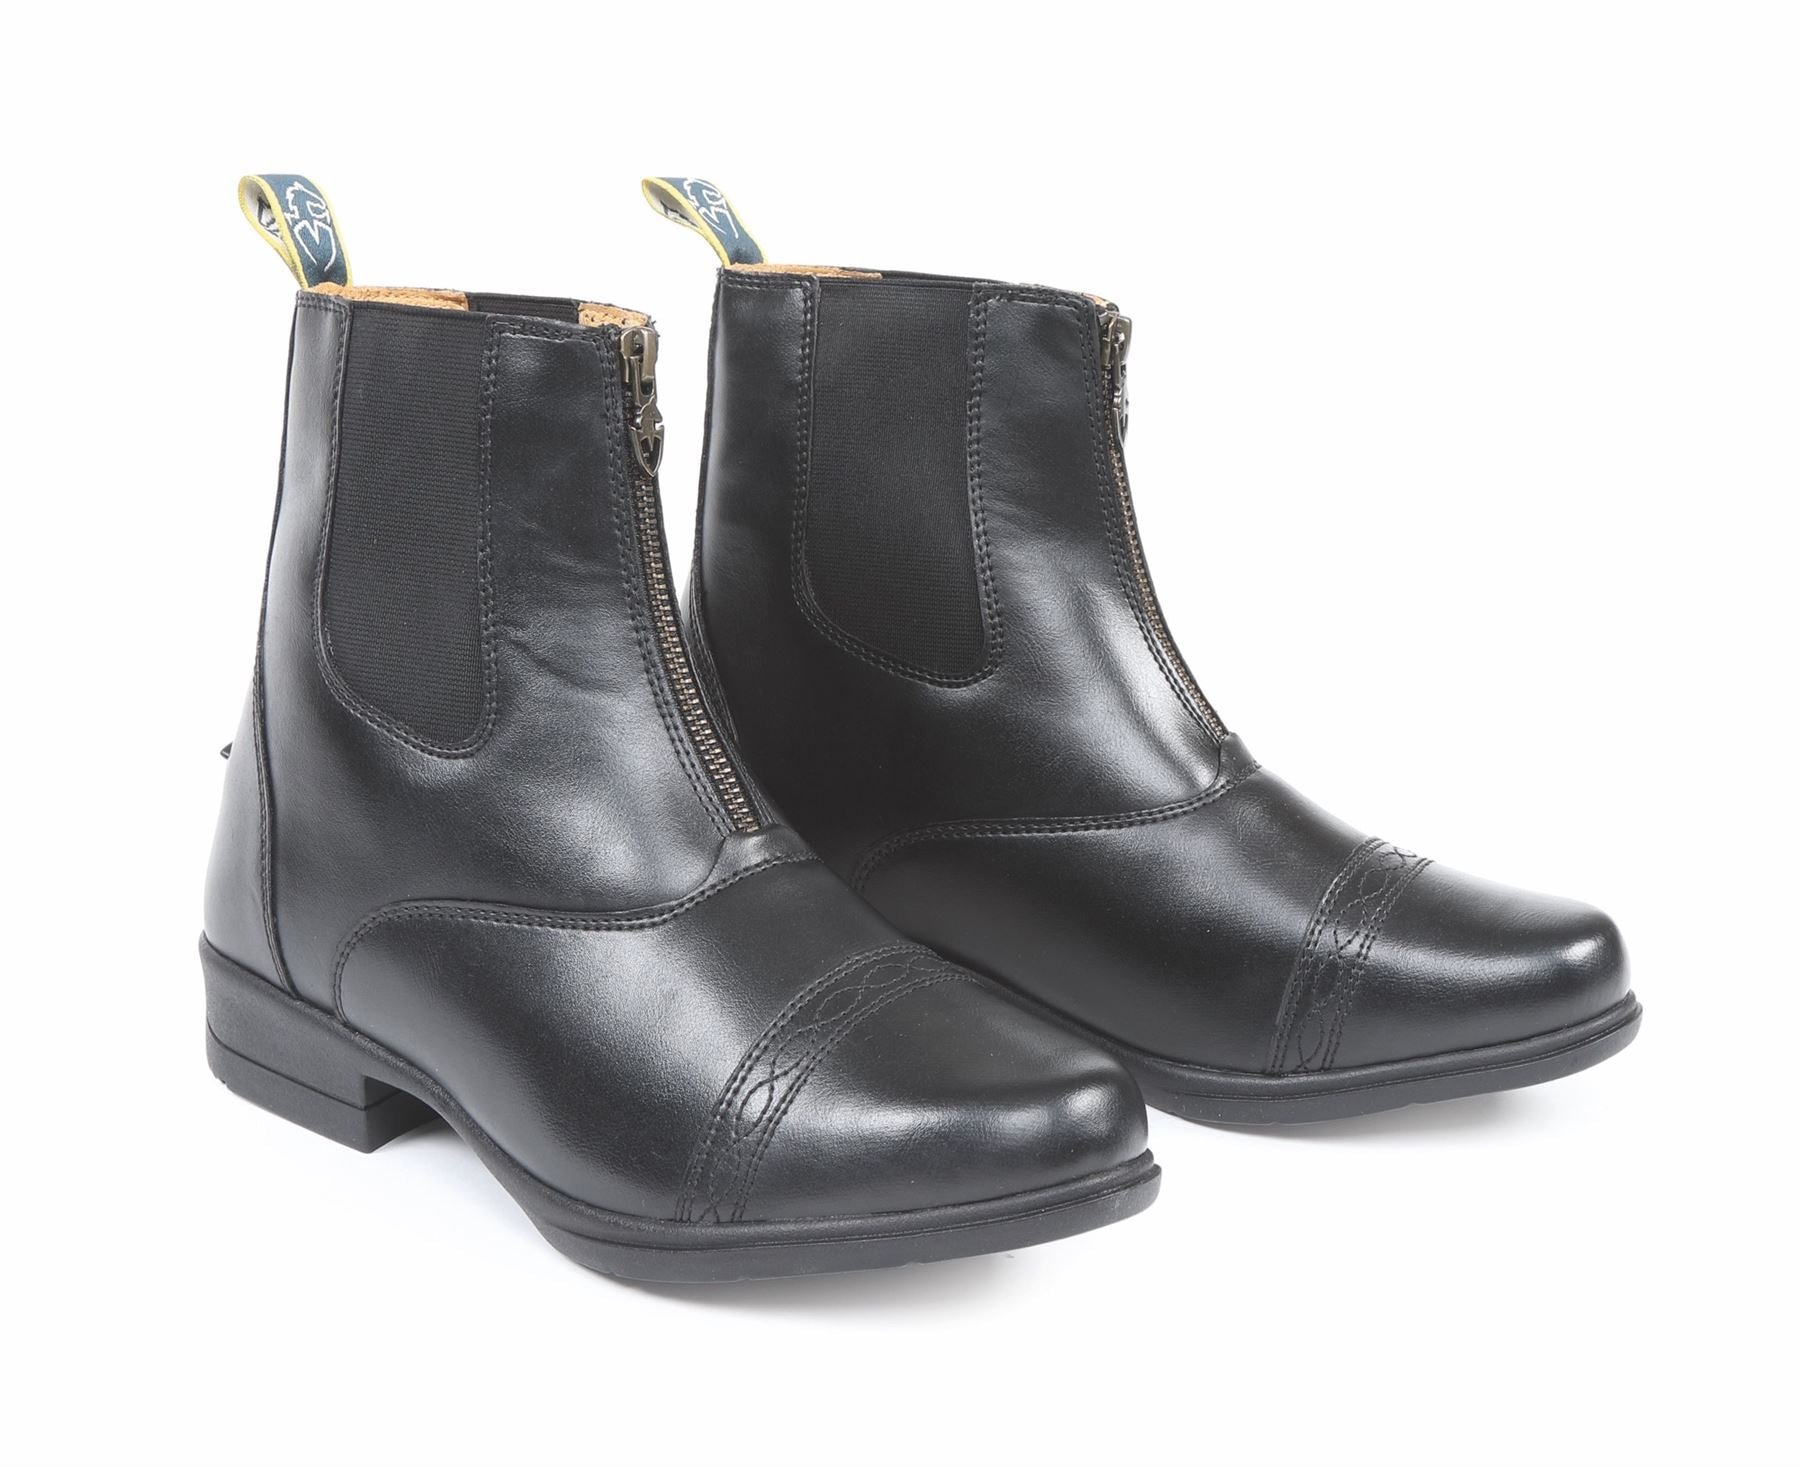 Shires Moretta Clio Paddock Boots - Just Horse Riders